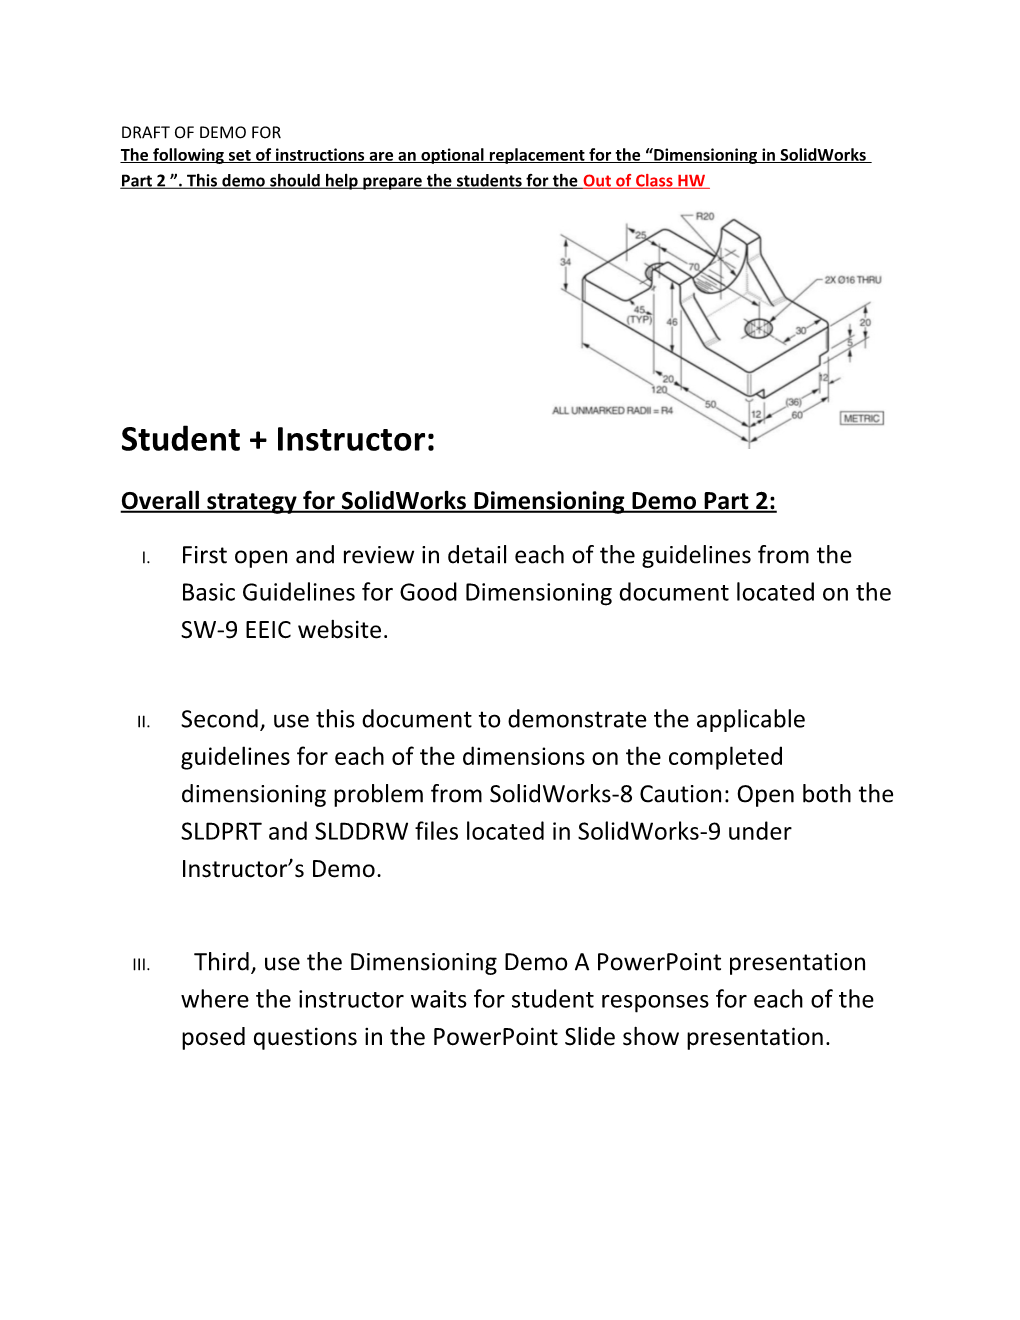 Overall Strategy for Solidworks Dimensioning Demo Part 2